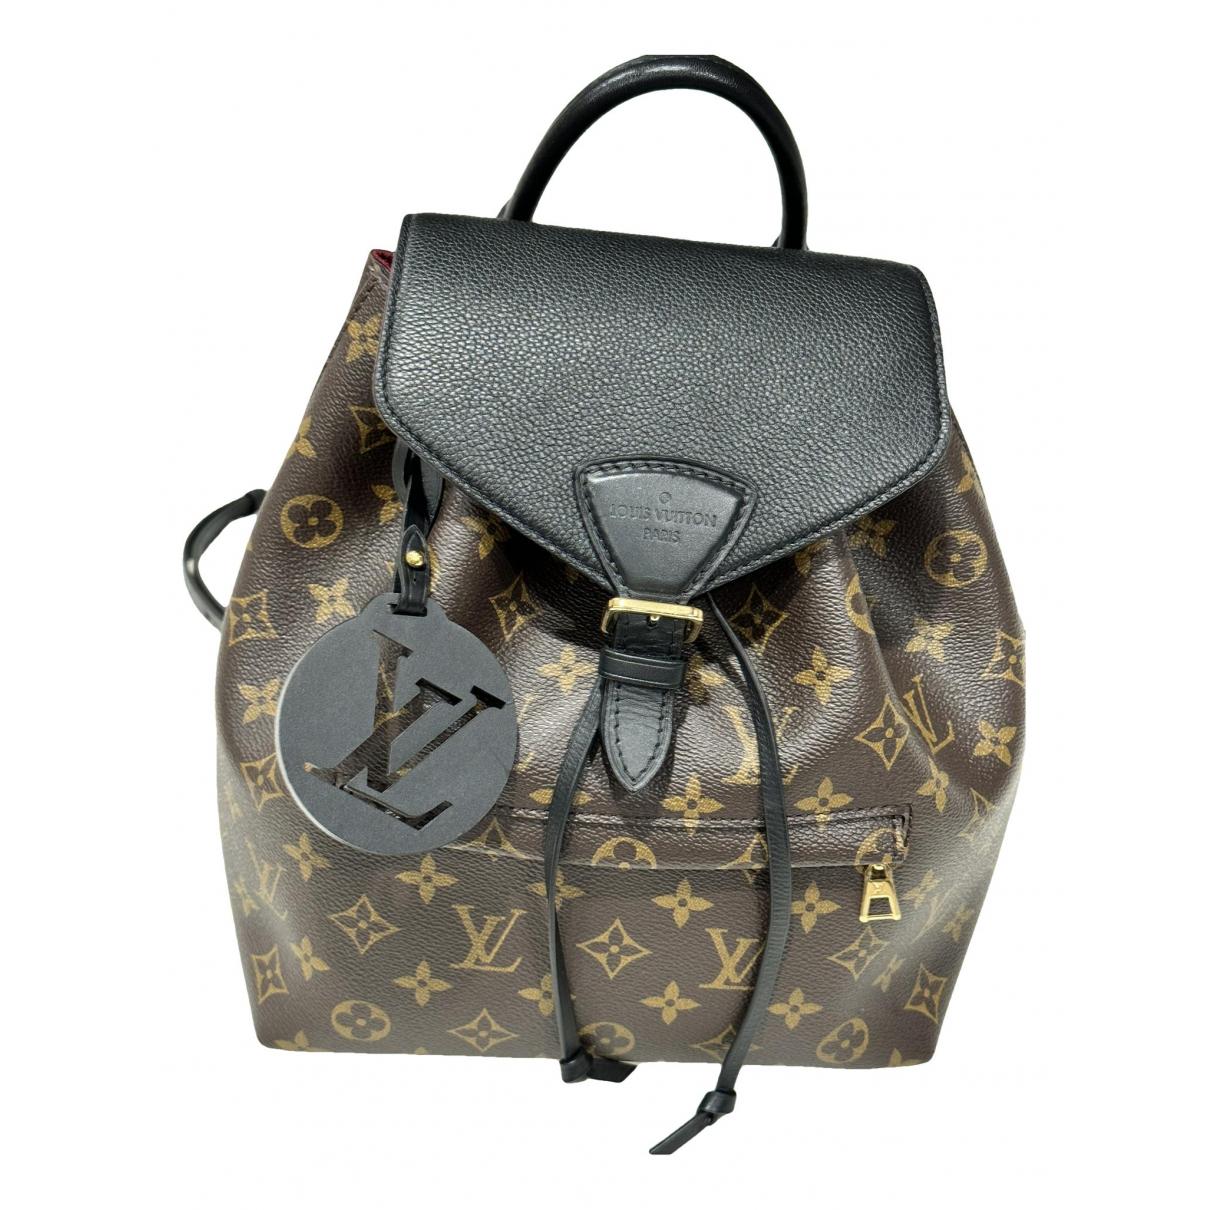 Louis Vuitton Palm Springs PM vs 2020 Montsouris PM, Which Is Better?